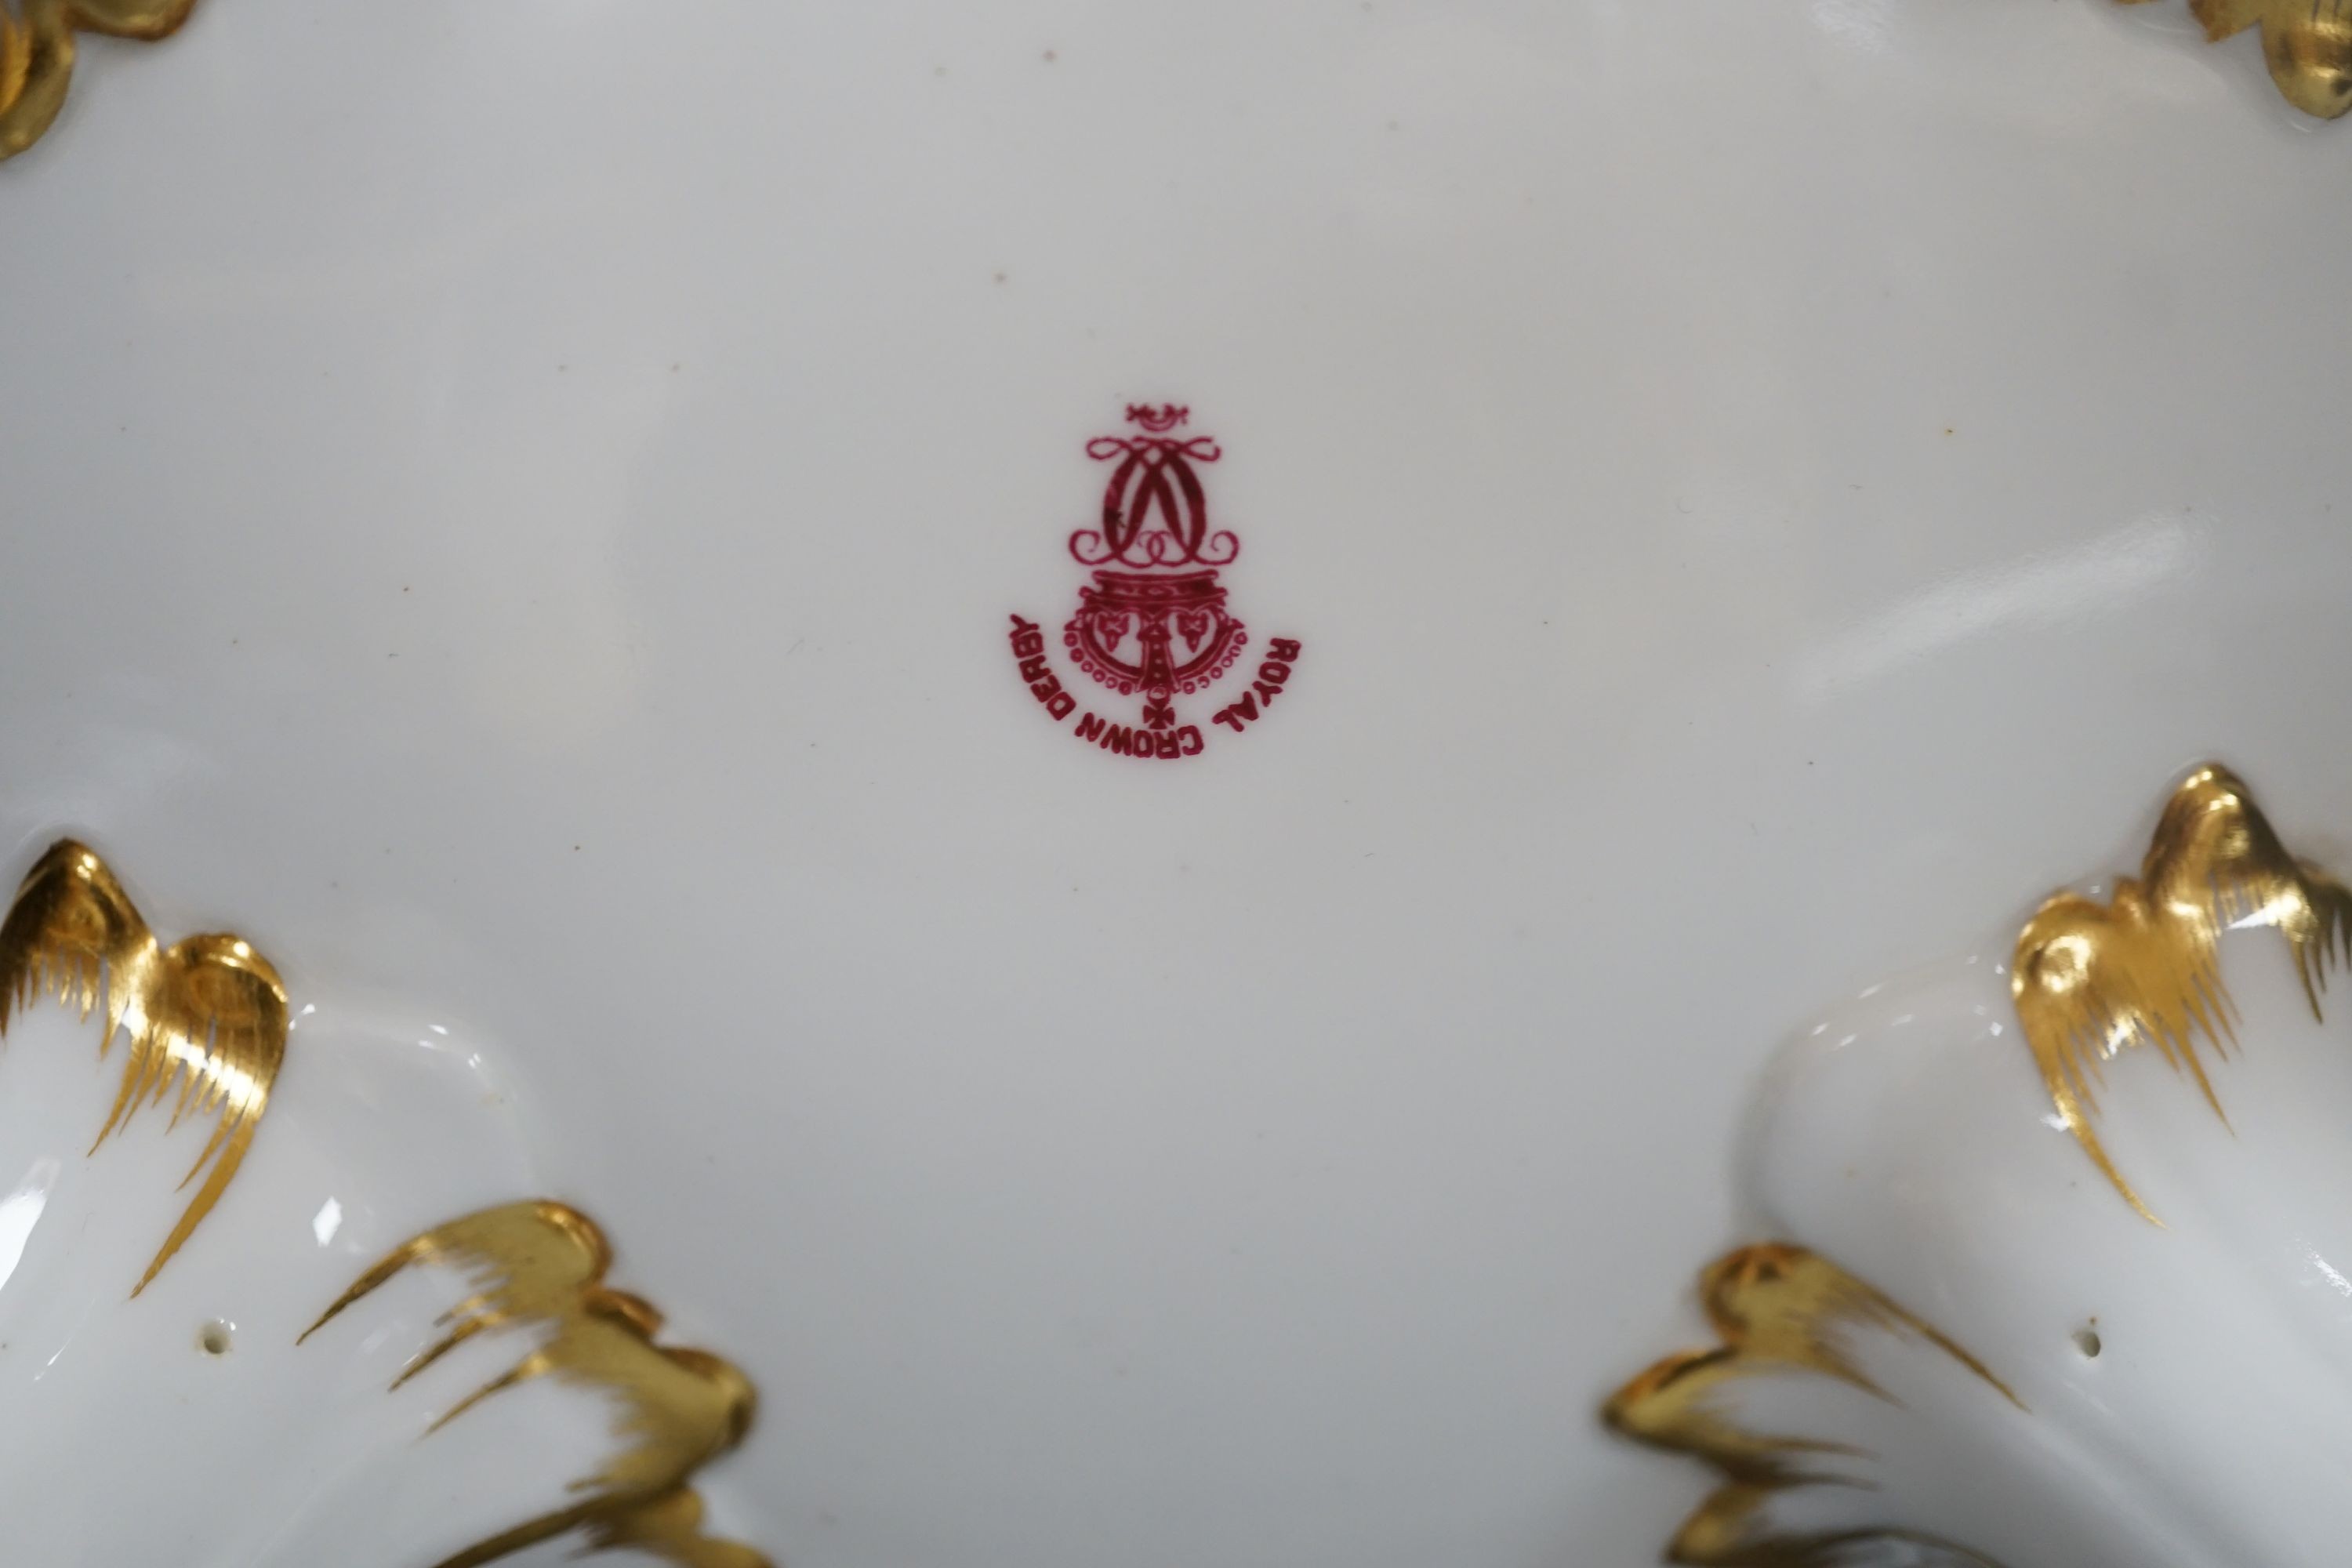 Royal Interest - A Royal Crown Derby crested serving bowl from the Royal Yacht Osborne, date code for 1891, the yacht decommissioned in 1908, diameter 28 cms.